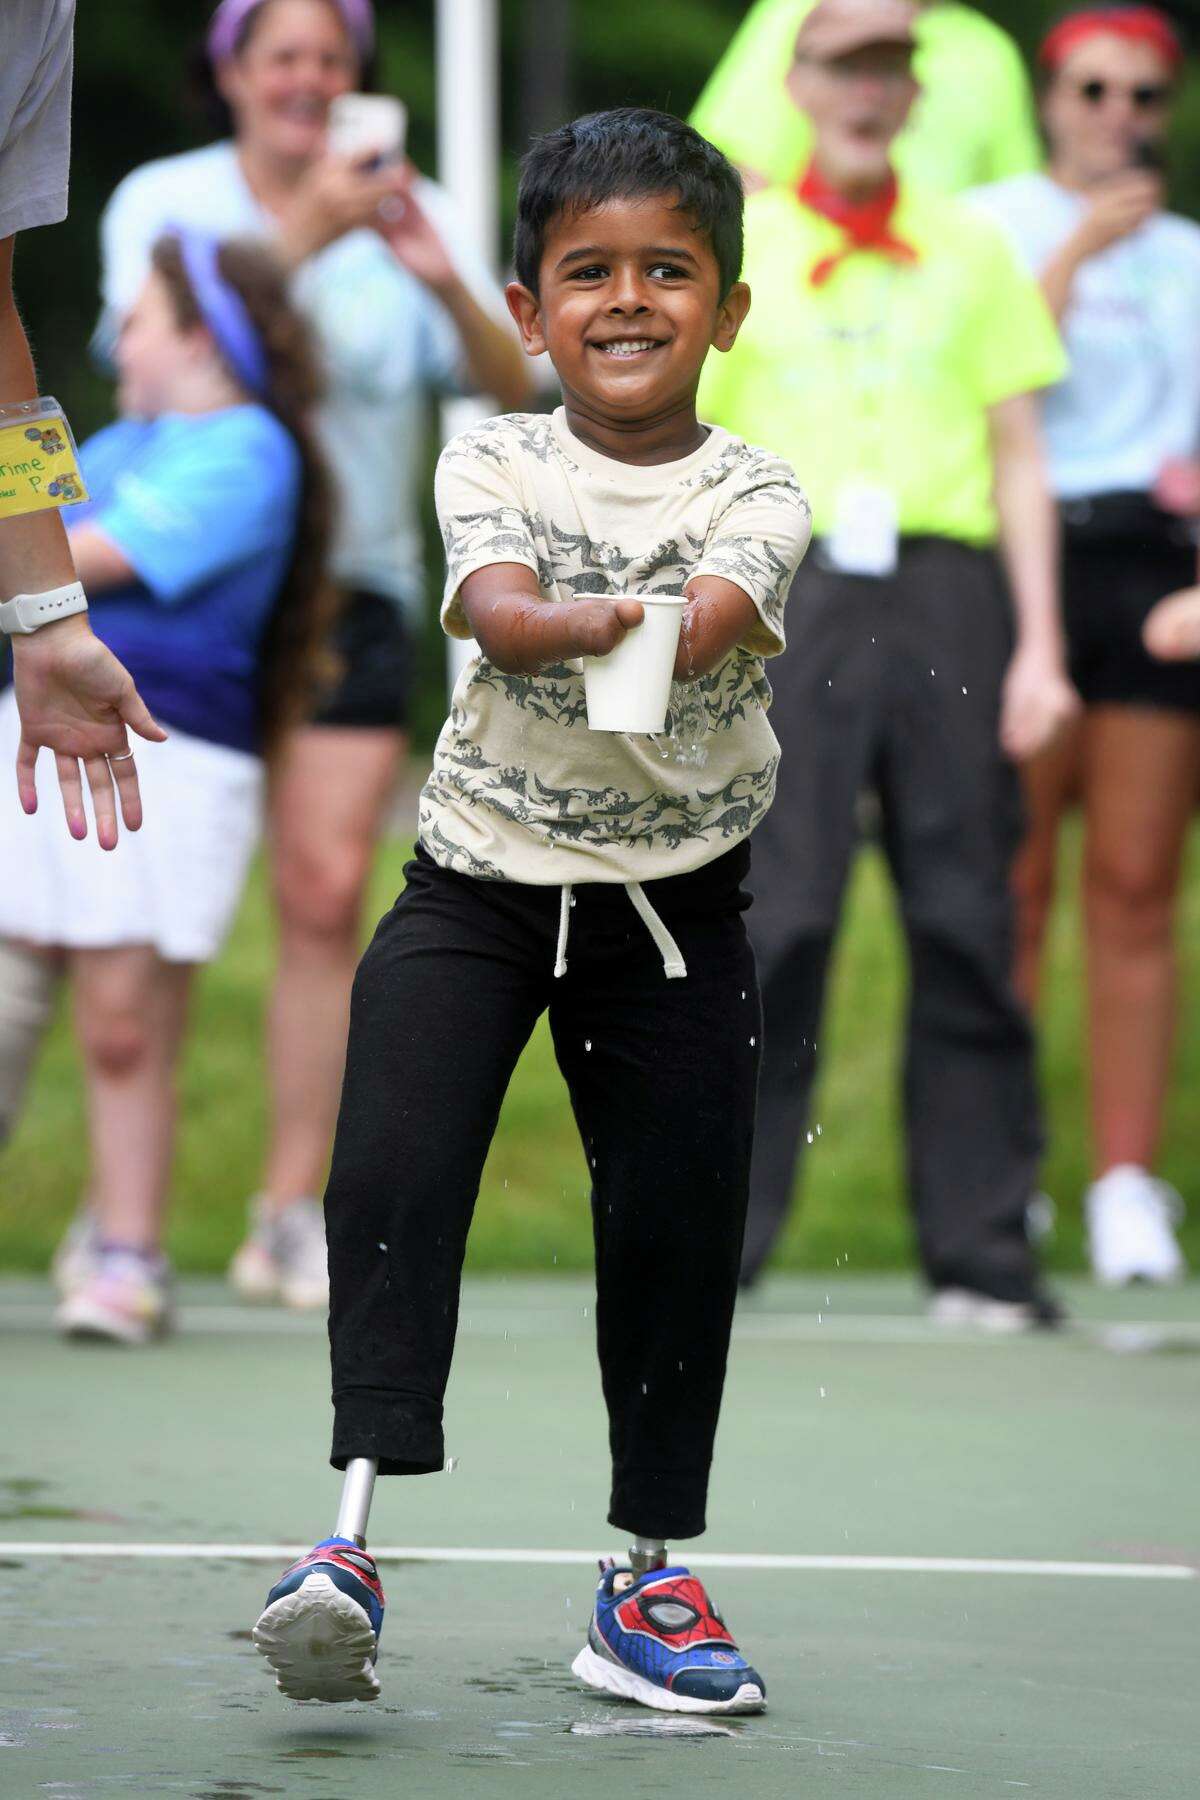 Arnav Sundeep, of Mountain Top, Pa., runs with a cup of water during a relay race at Camp No Limits, on Quinnipiac University’s York Hill Campus in Hamden.